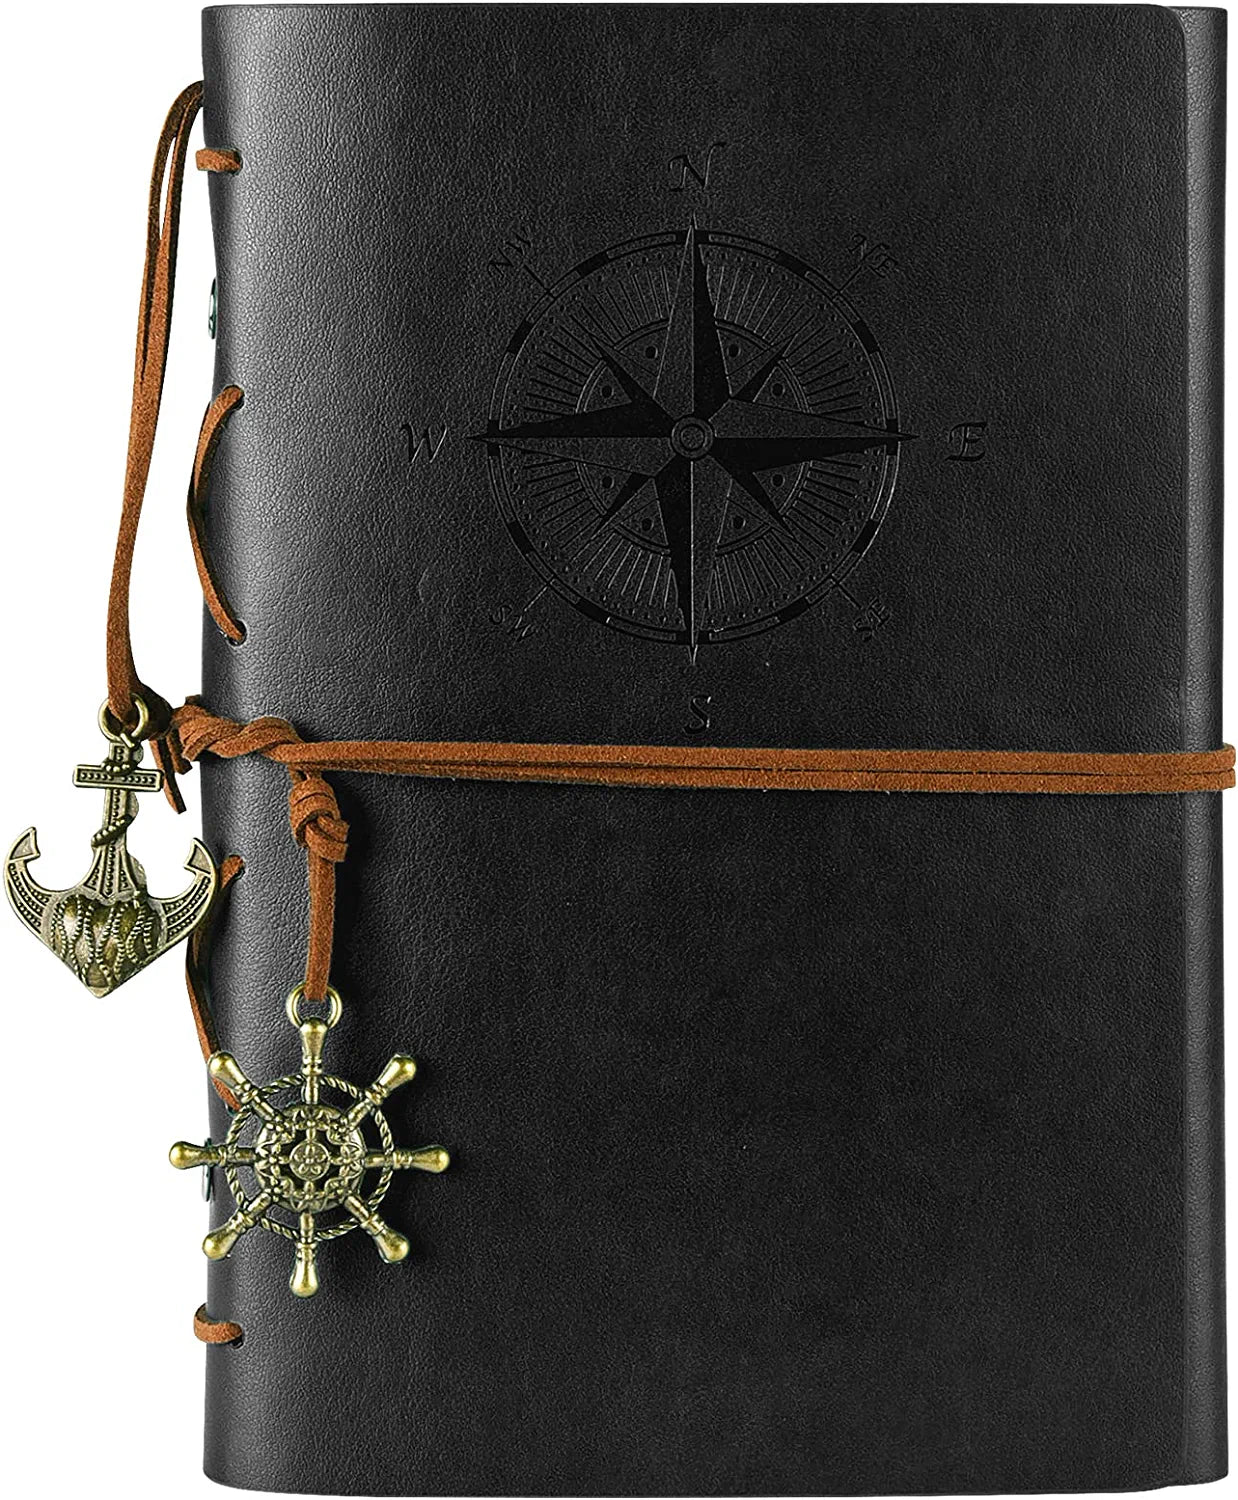 Vintage Refillable Journey Diary, Classic Embossed Travel Journal Notebook with Blank Pages and Retro Pendants